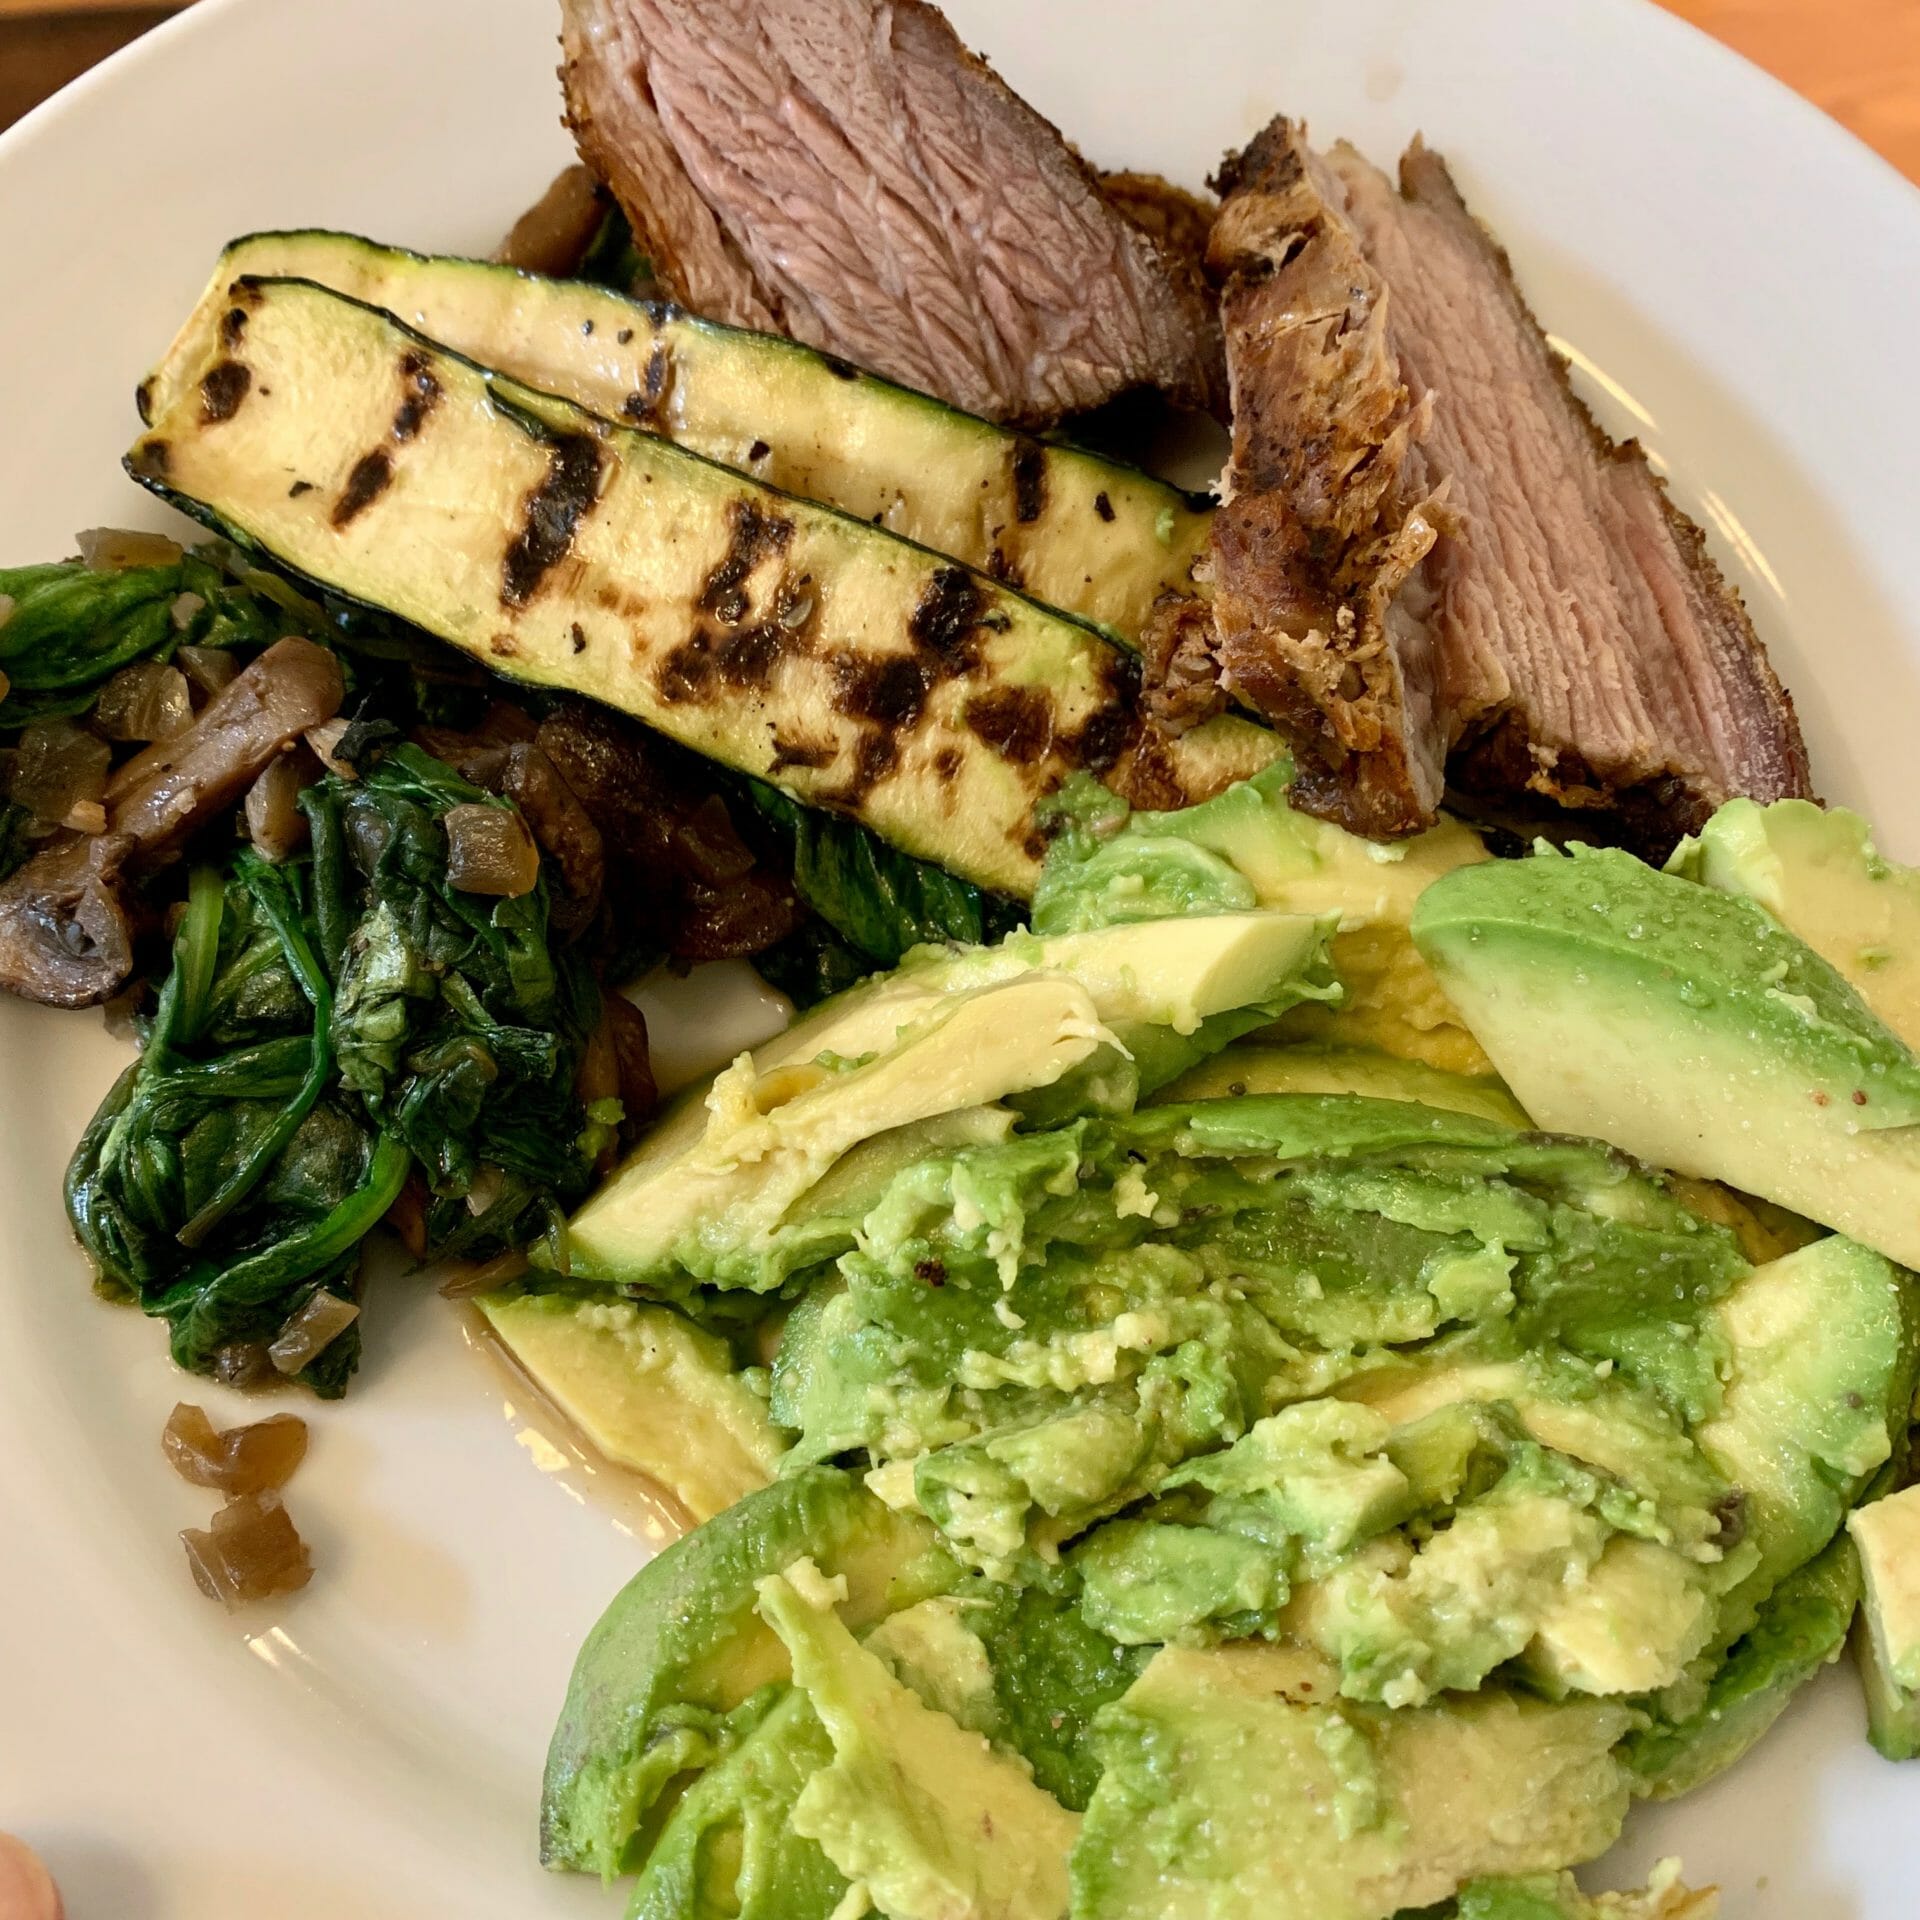 Brisket with grilled zucchini, avocado, spinach and mushrooms